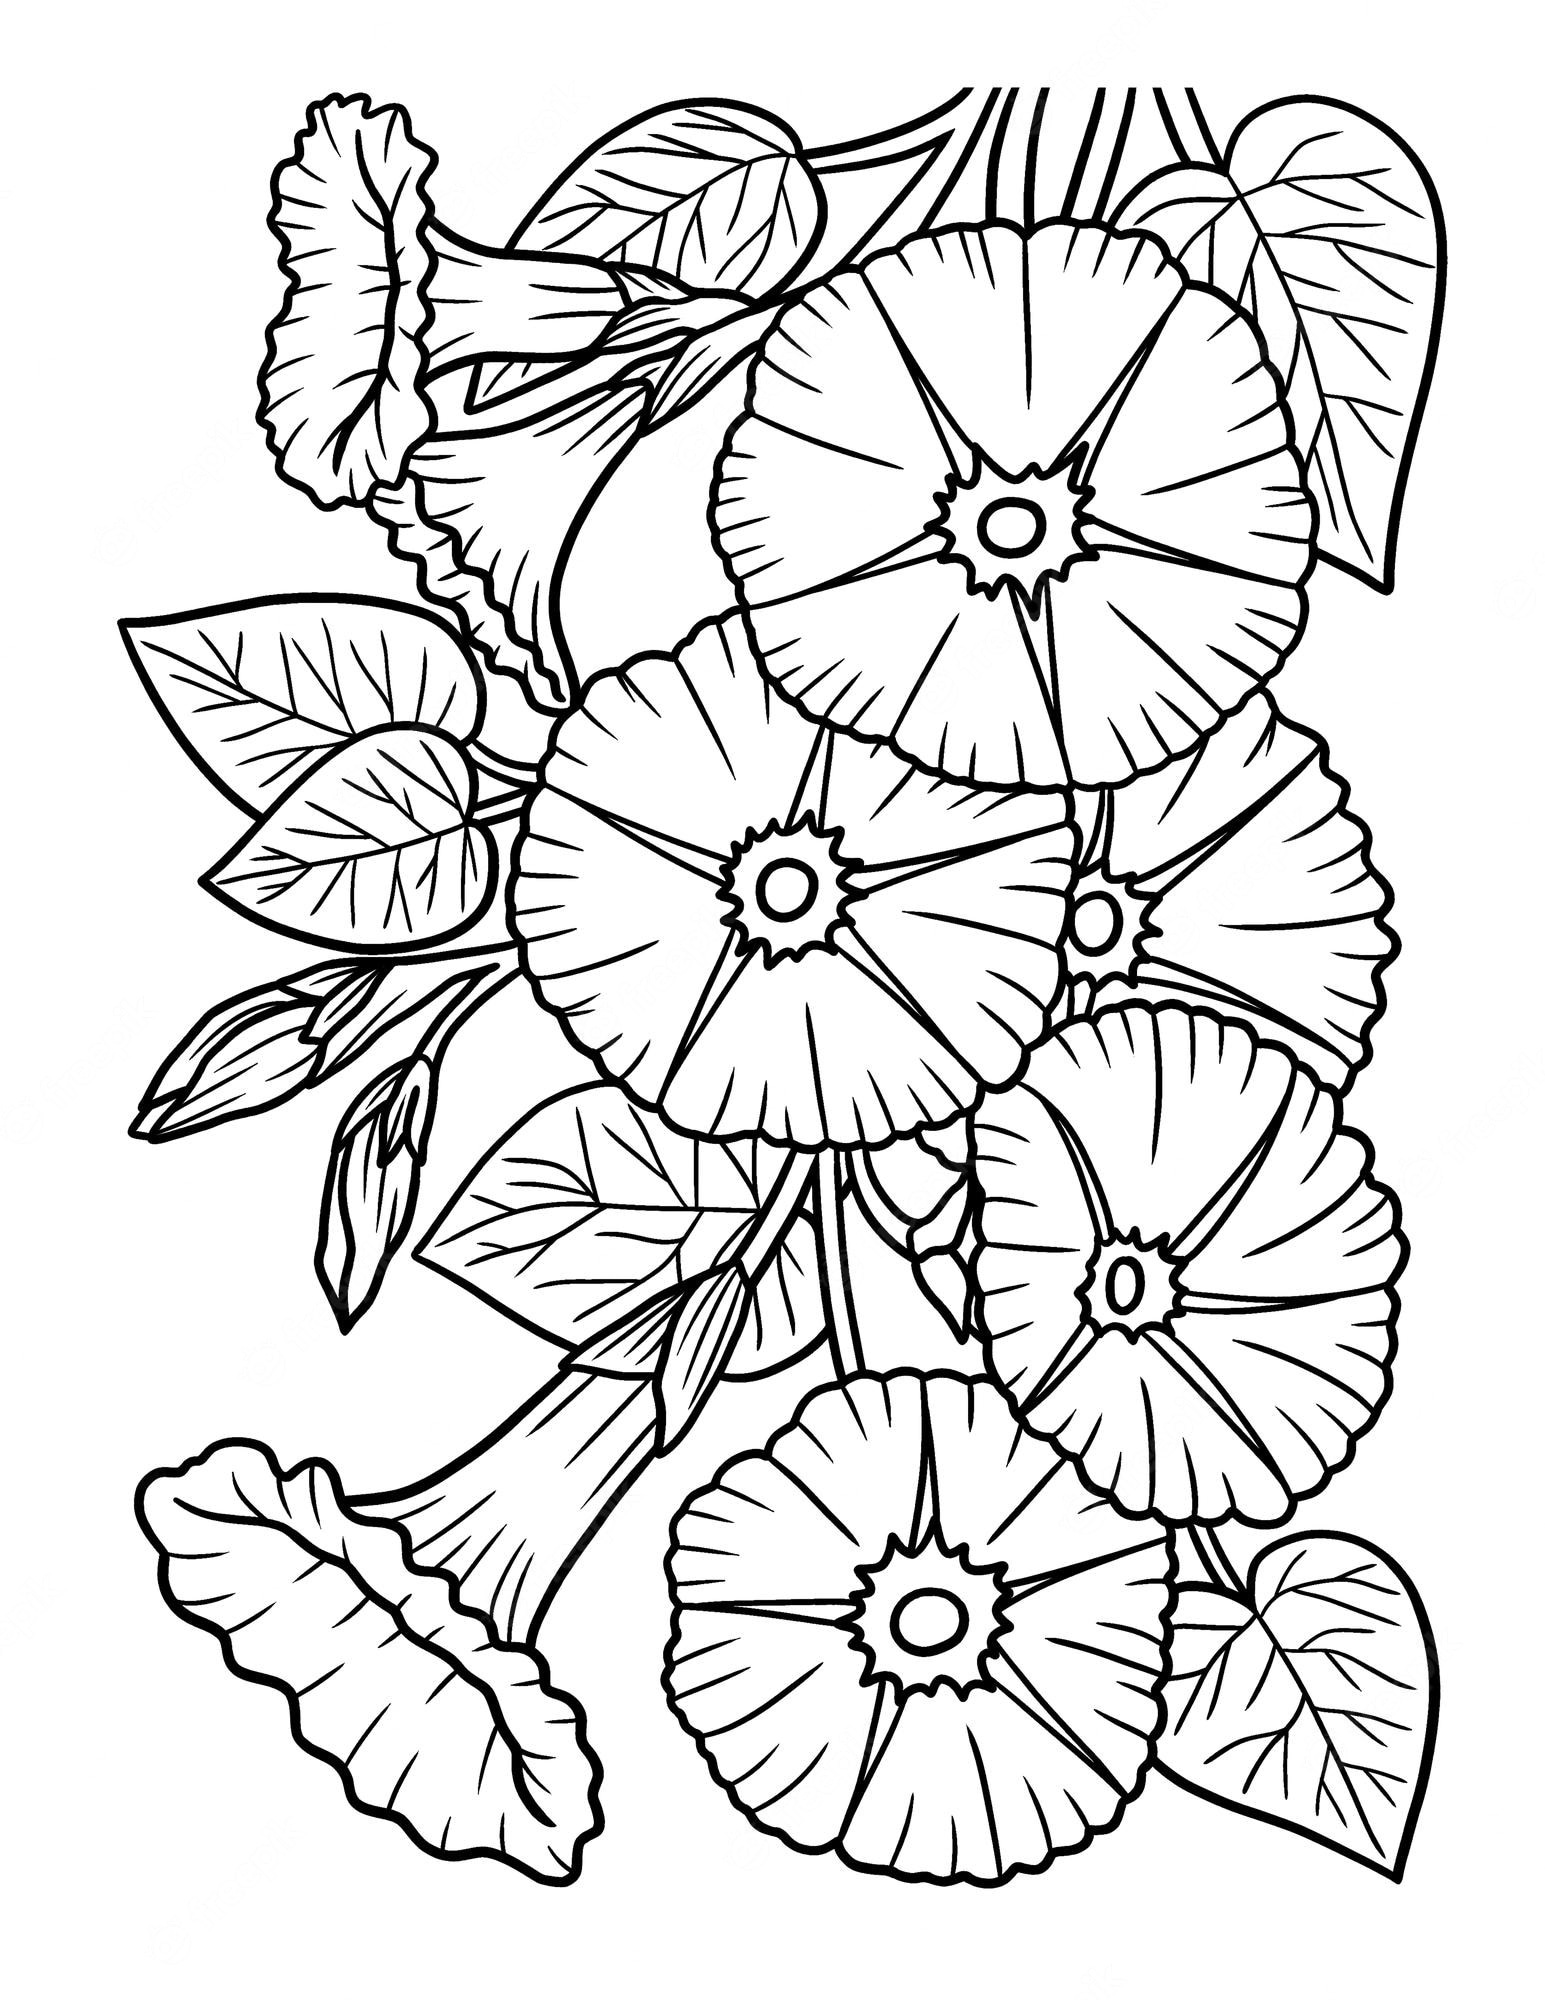 Premium Vector | Morning glory flower coloring page for adults